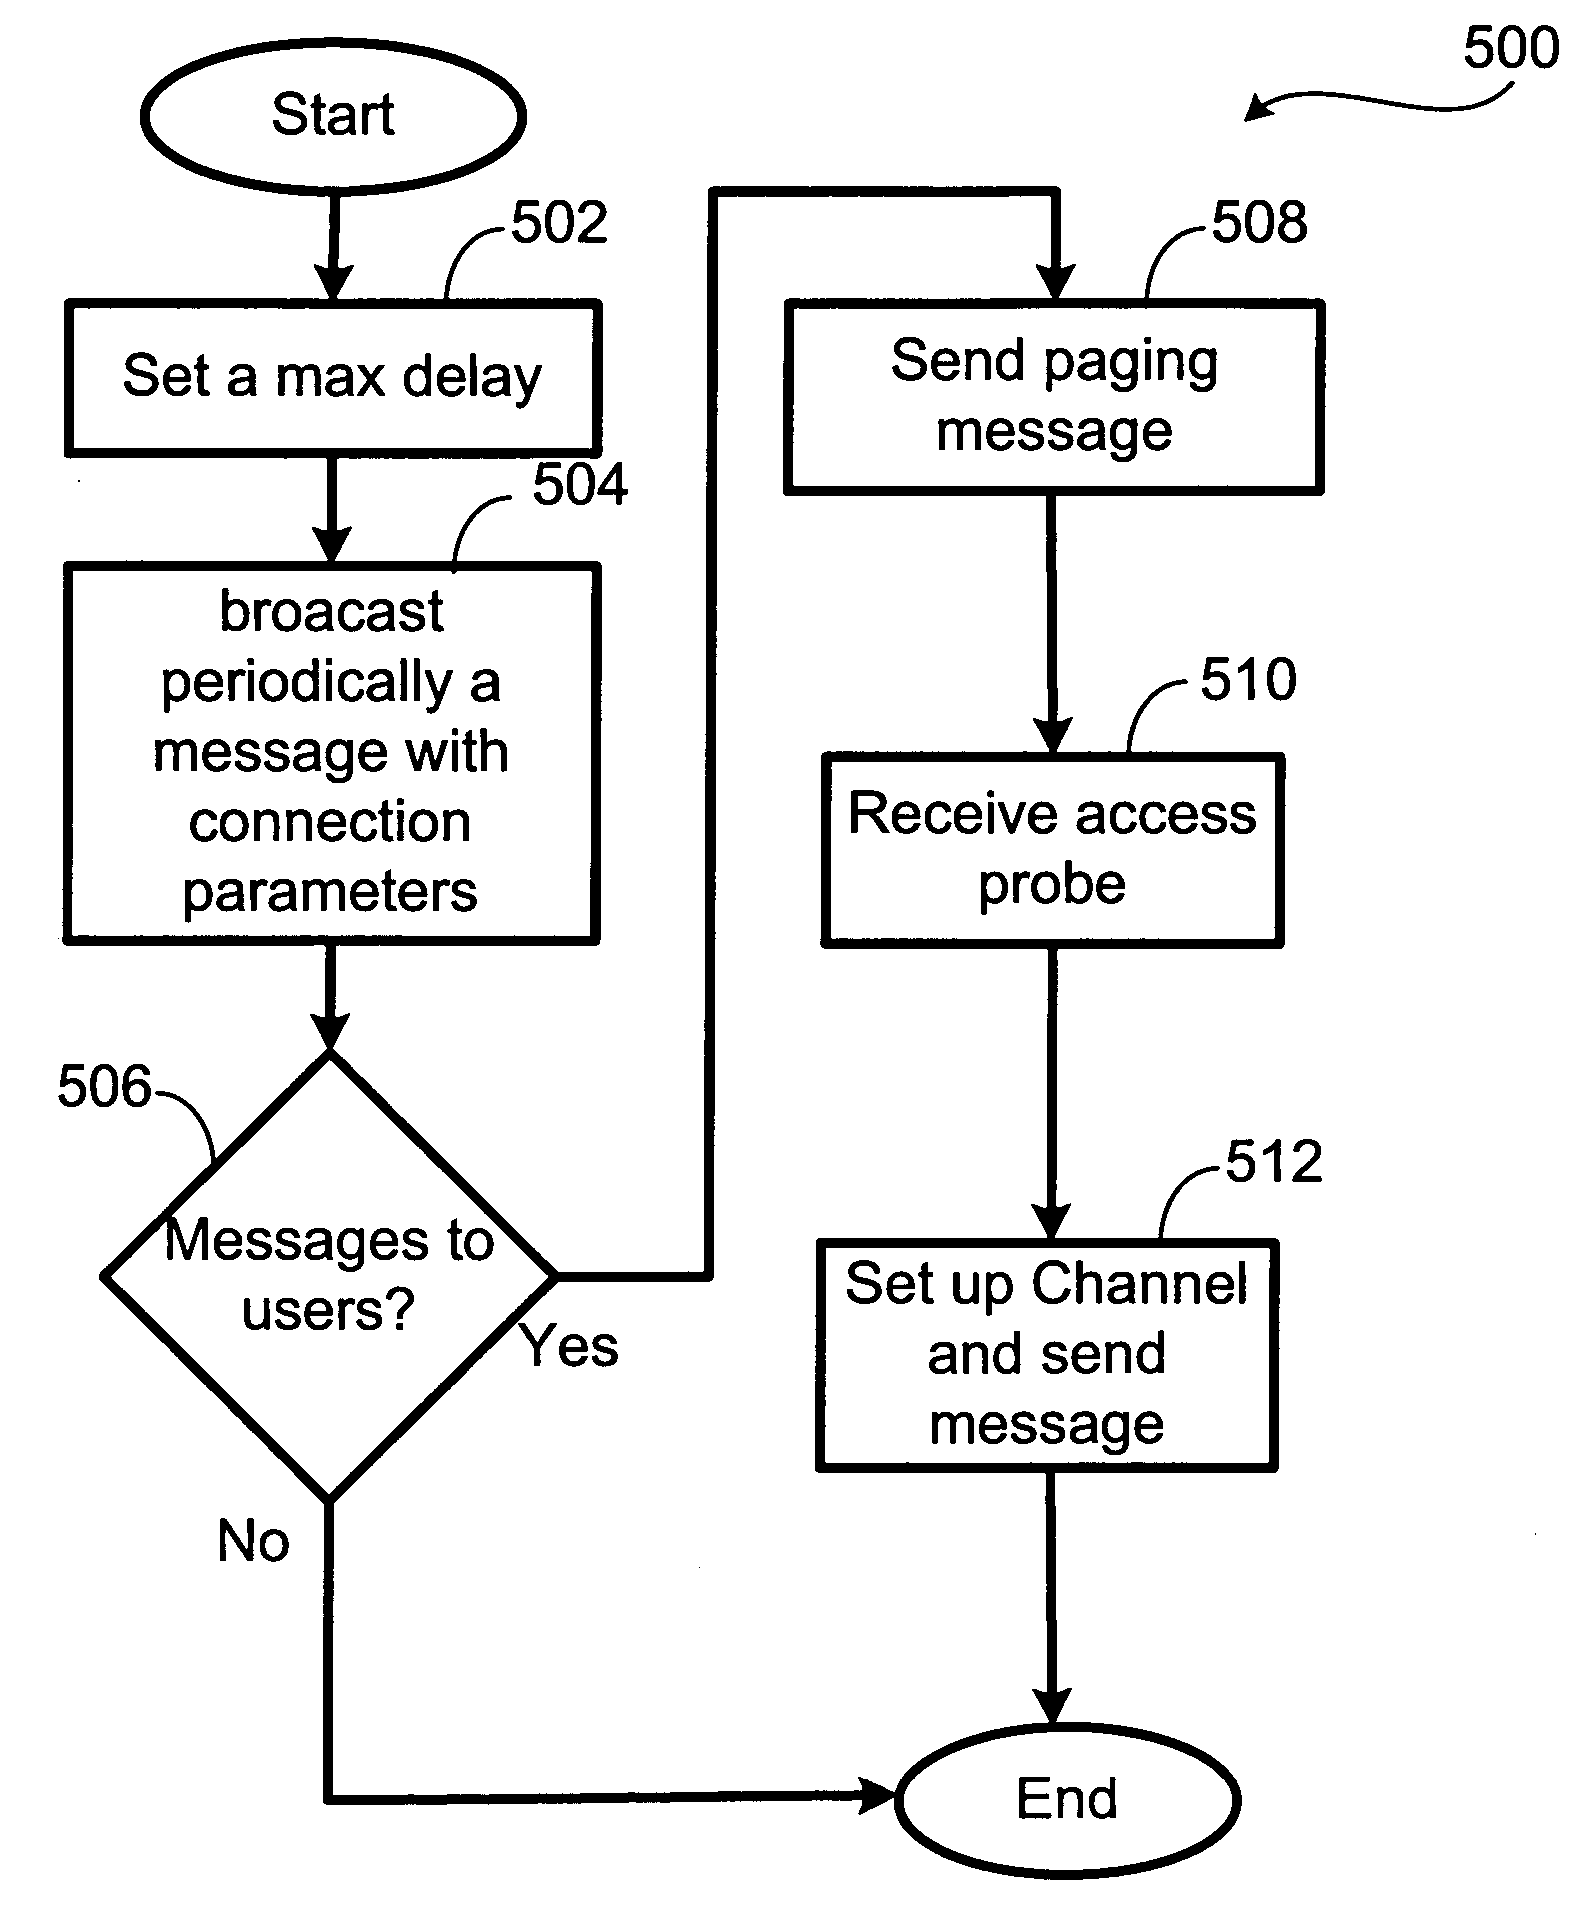 Apparatus and method for resolving request collision in a high bandwidth wireless network